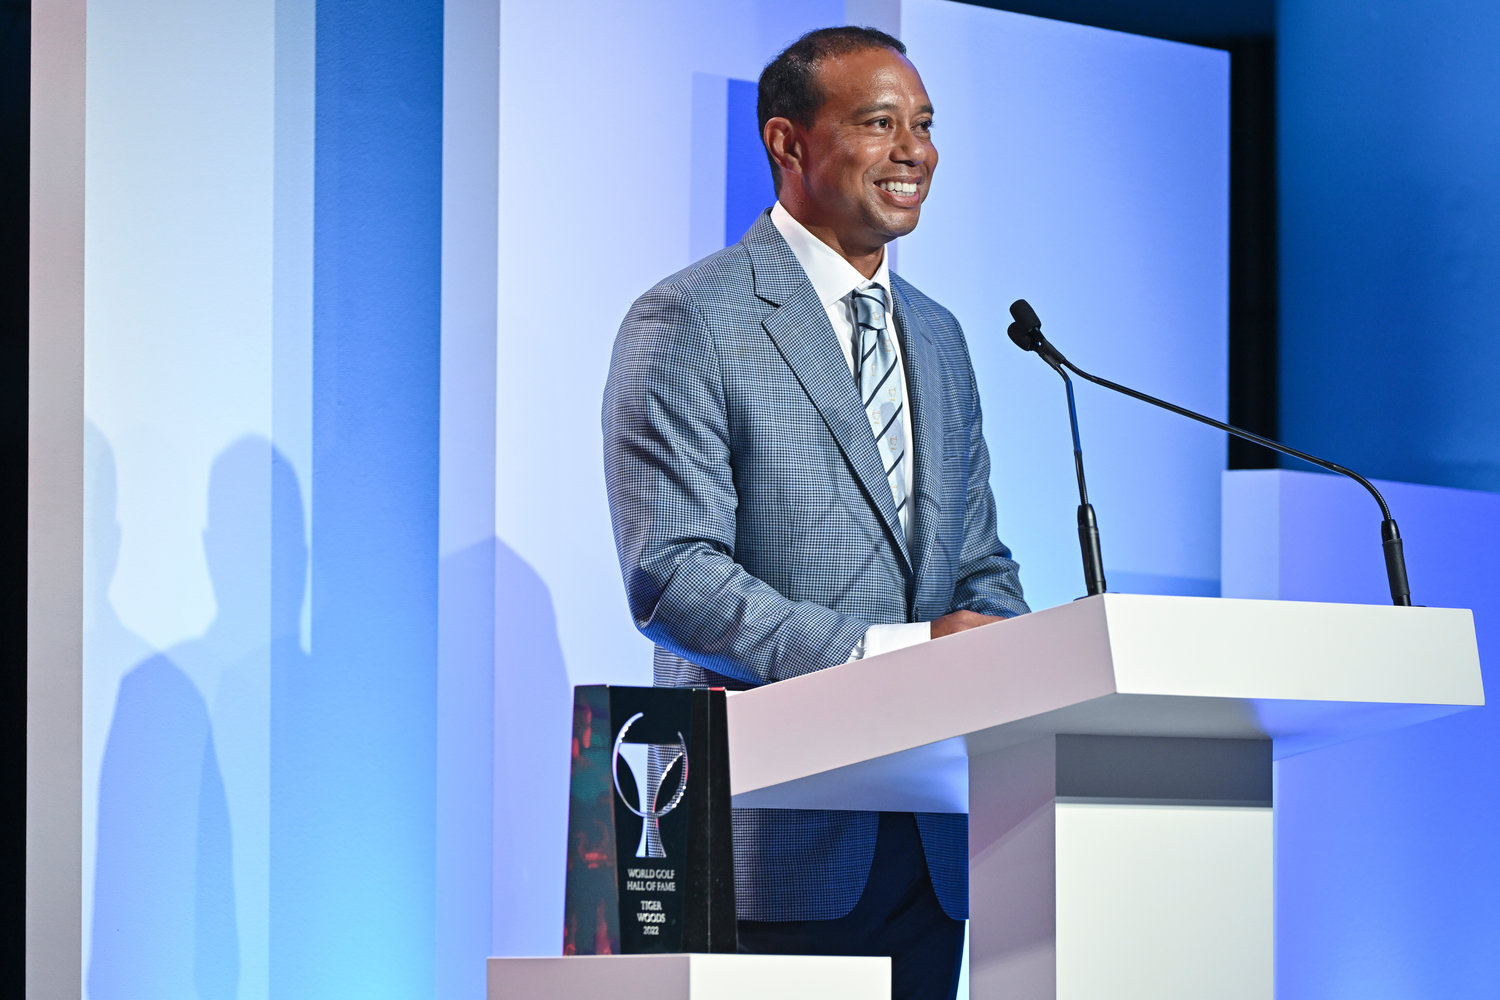 Tiger Woods speaks after being inducted during the World Golf Hall of Fame.